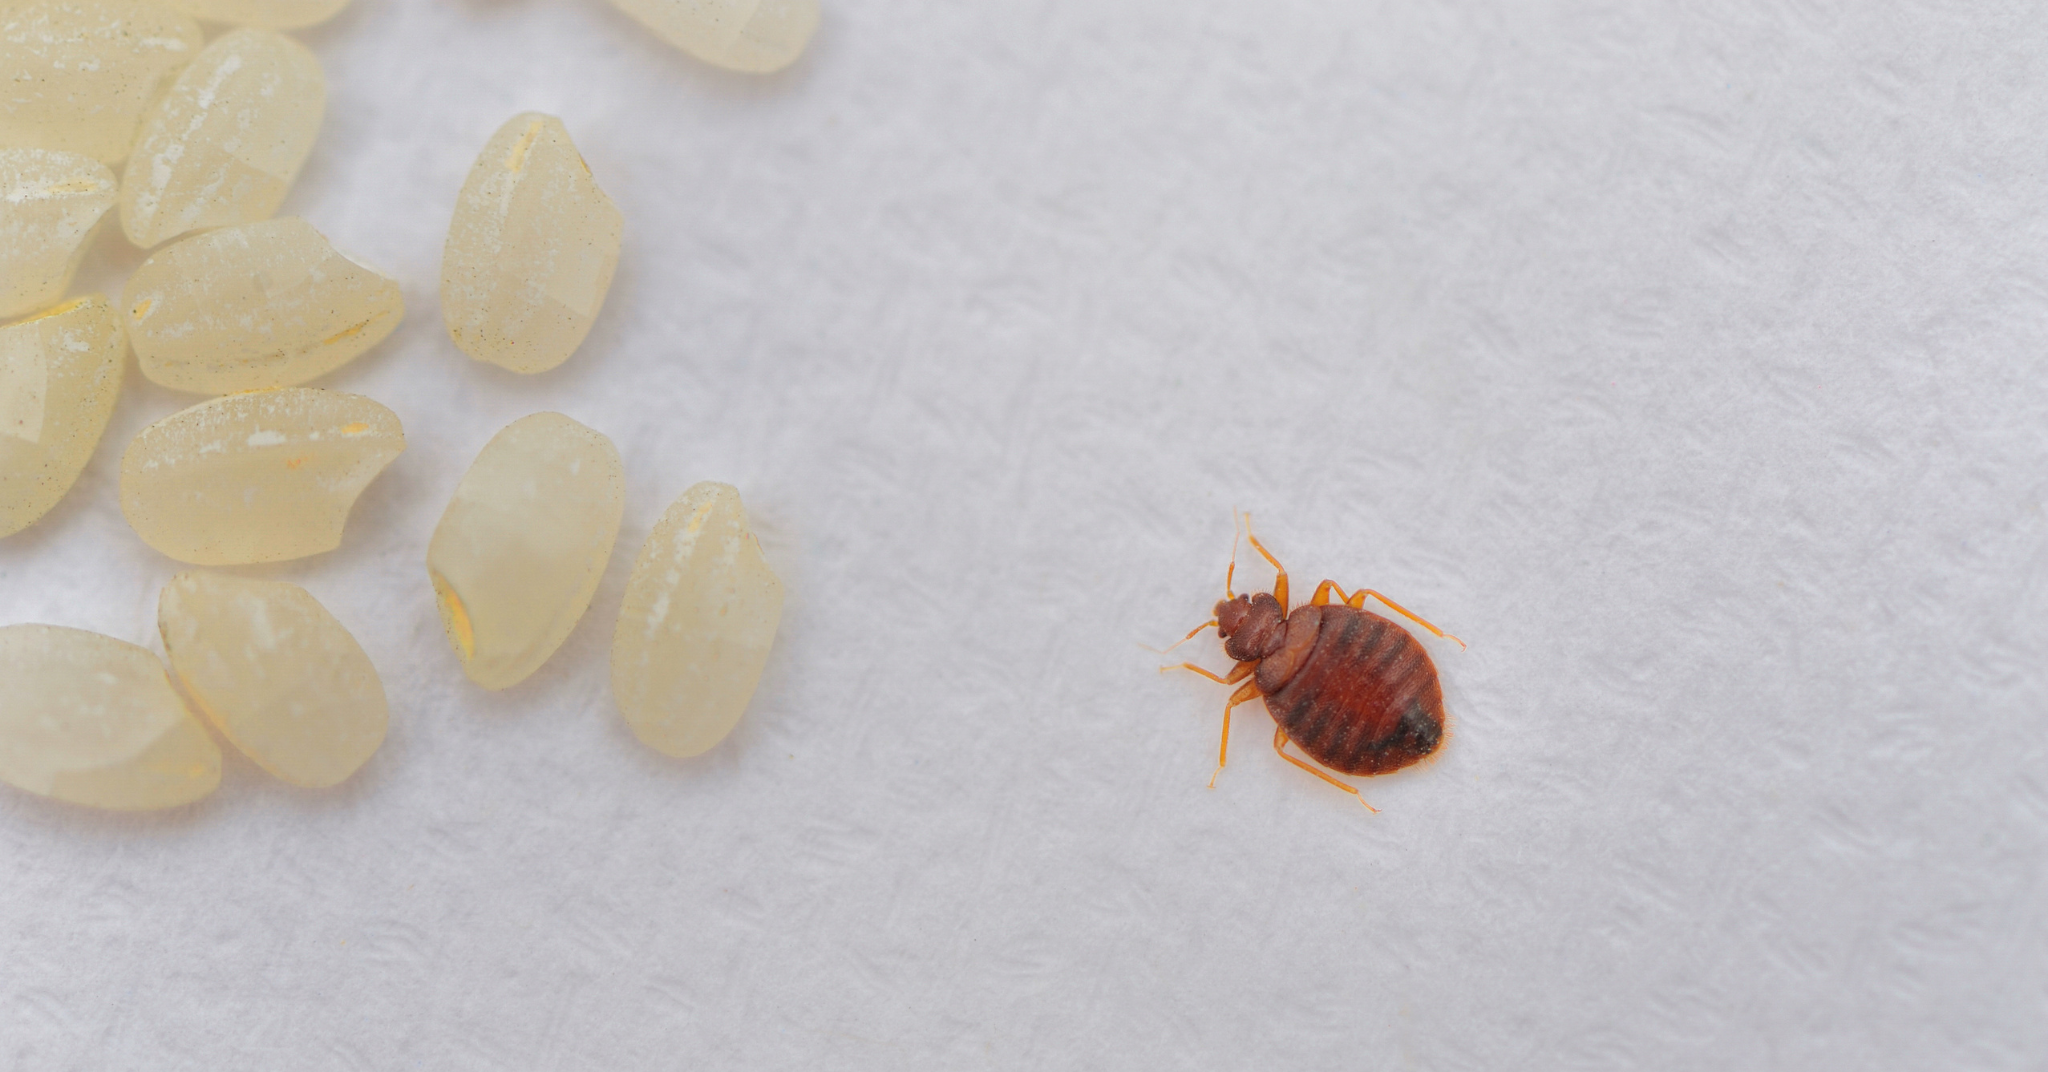 How to Check for Bedbugs